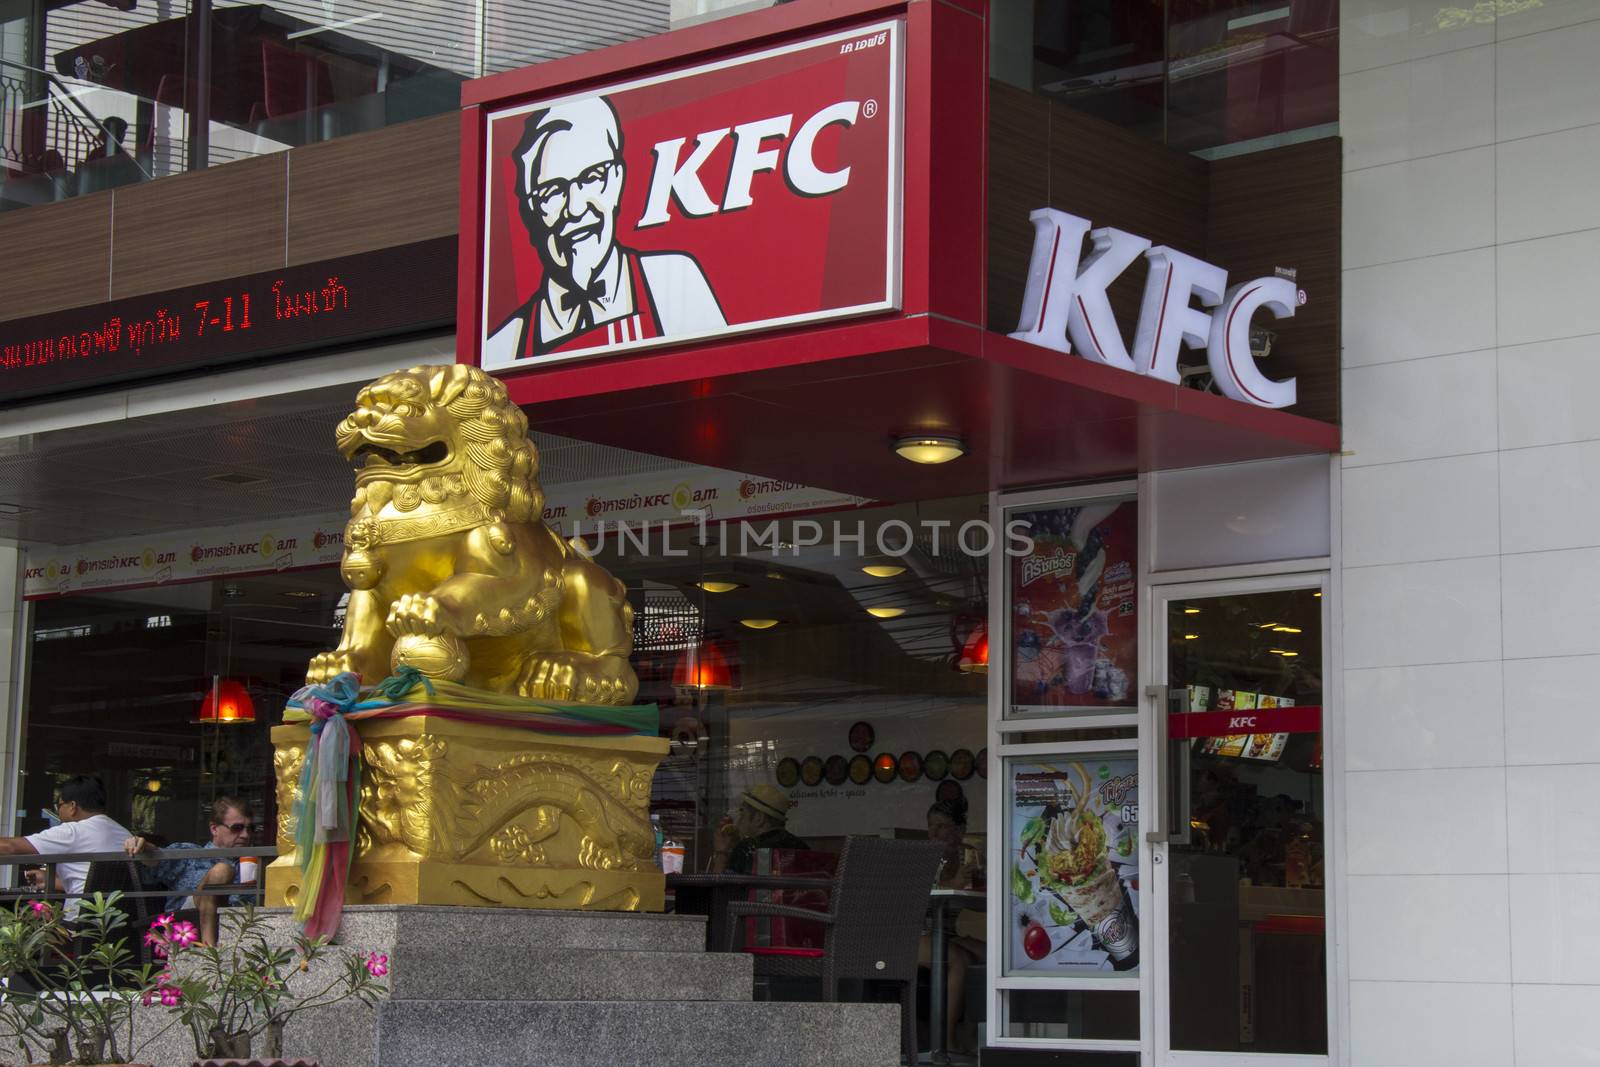 BANGKOK, THAILAND- OCT 5TH: A branch of KFC on Sukhumvit Road, Bangkok on October 5th 2012. The first KFC opened in Thailand in 1984 and there are now over 400 branches.